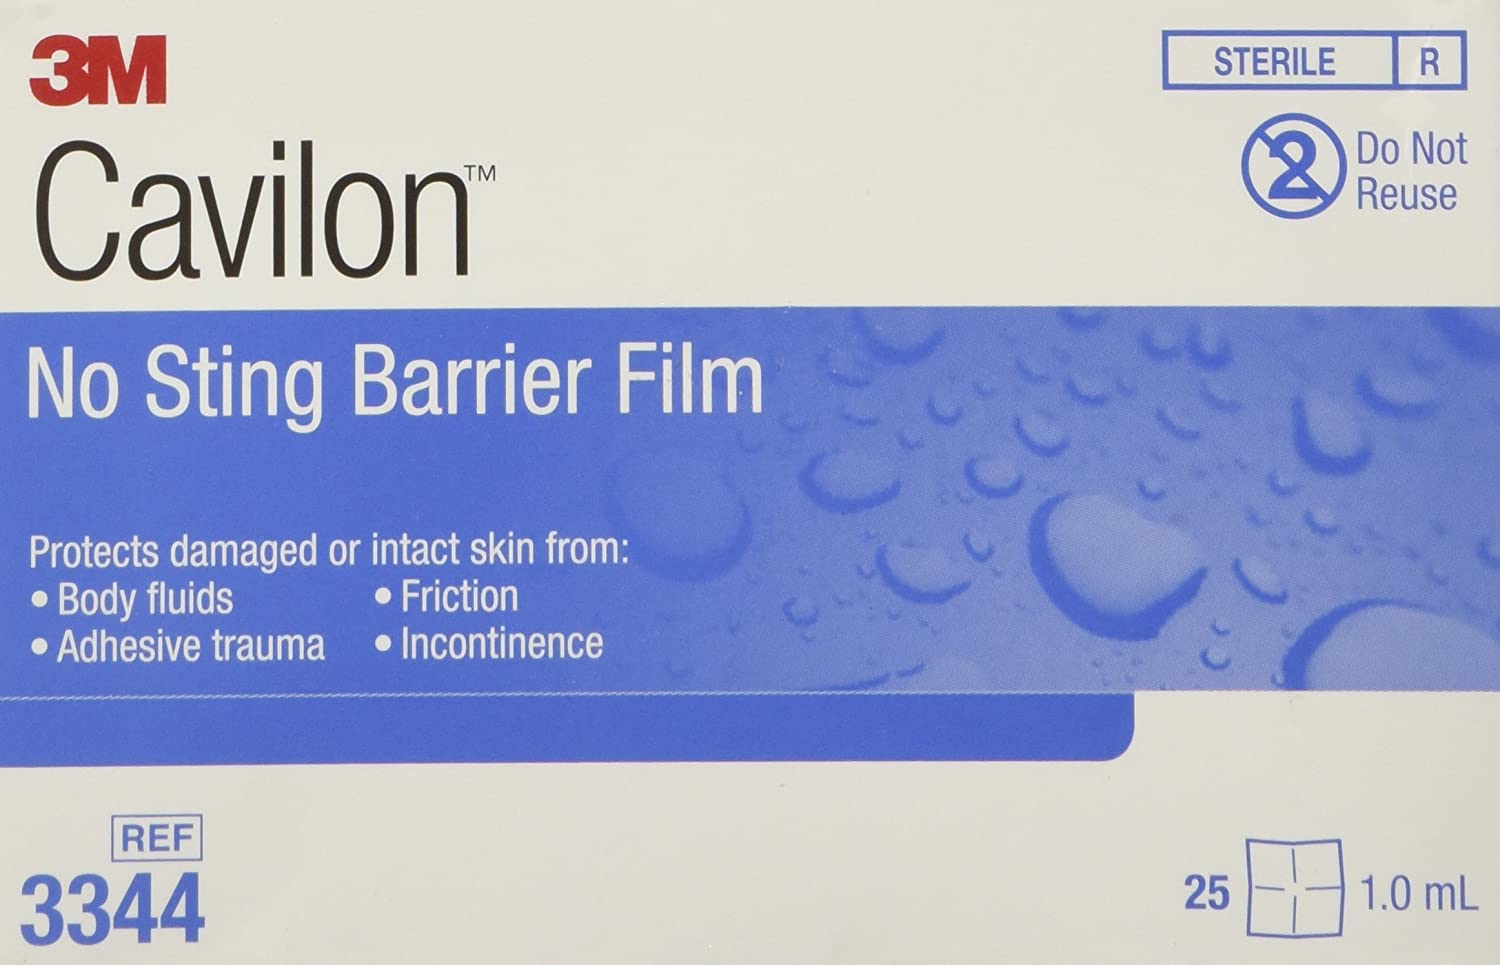 3M Cavilon No-sting Barrier Film 3344 - Transparent Barrier Film, Alcohol-Free, Hypoallergenic Wipes - 1 ml, Box of 25